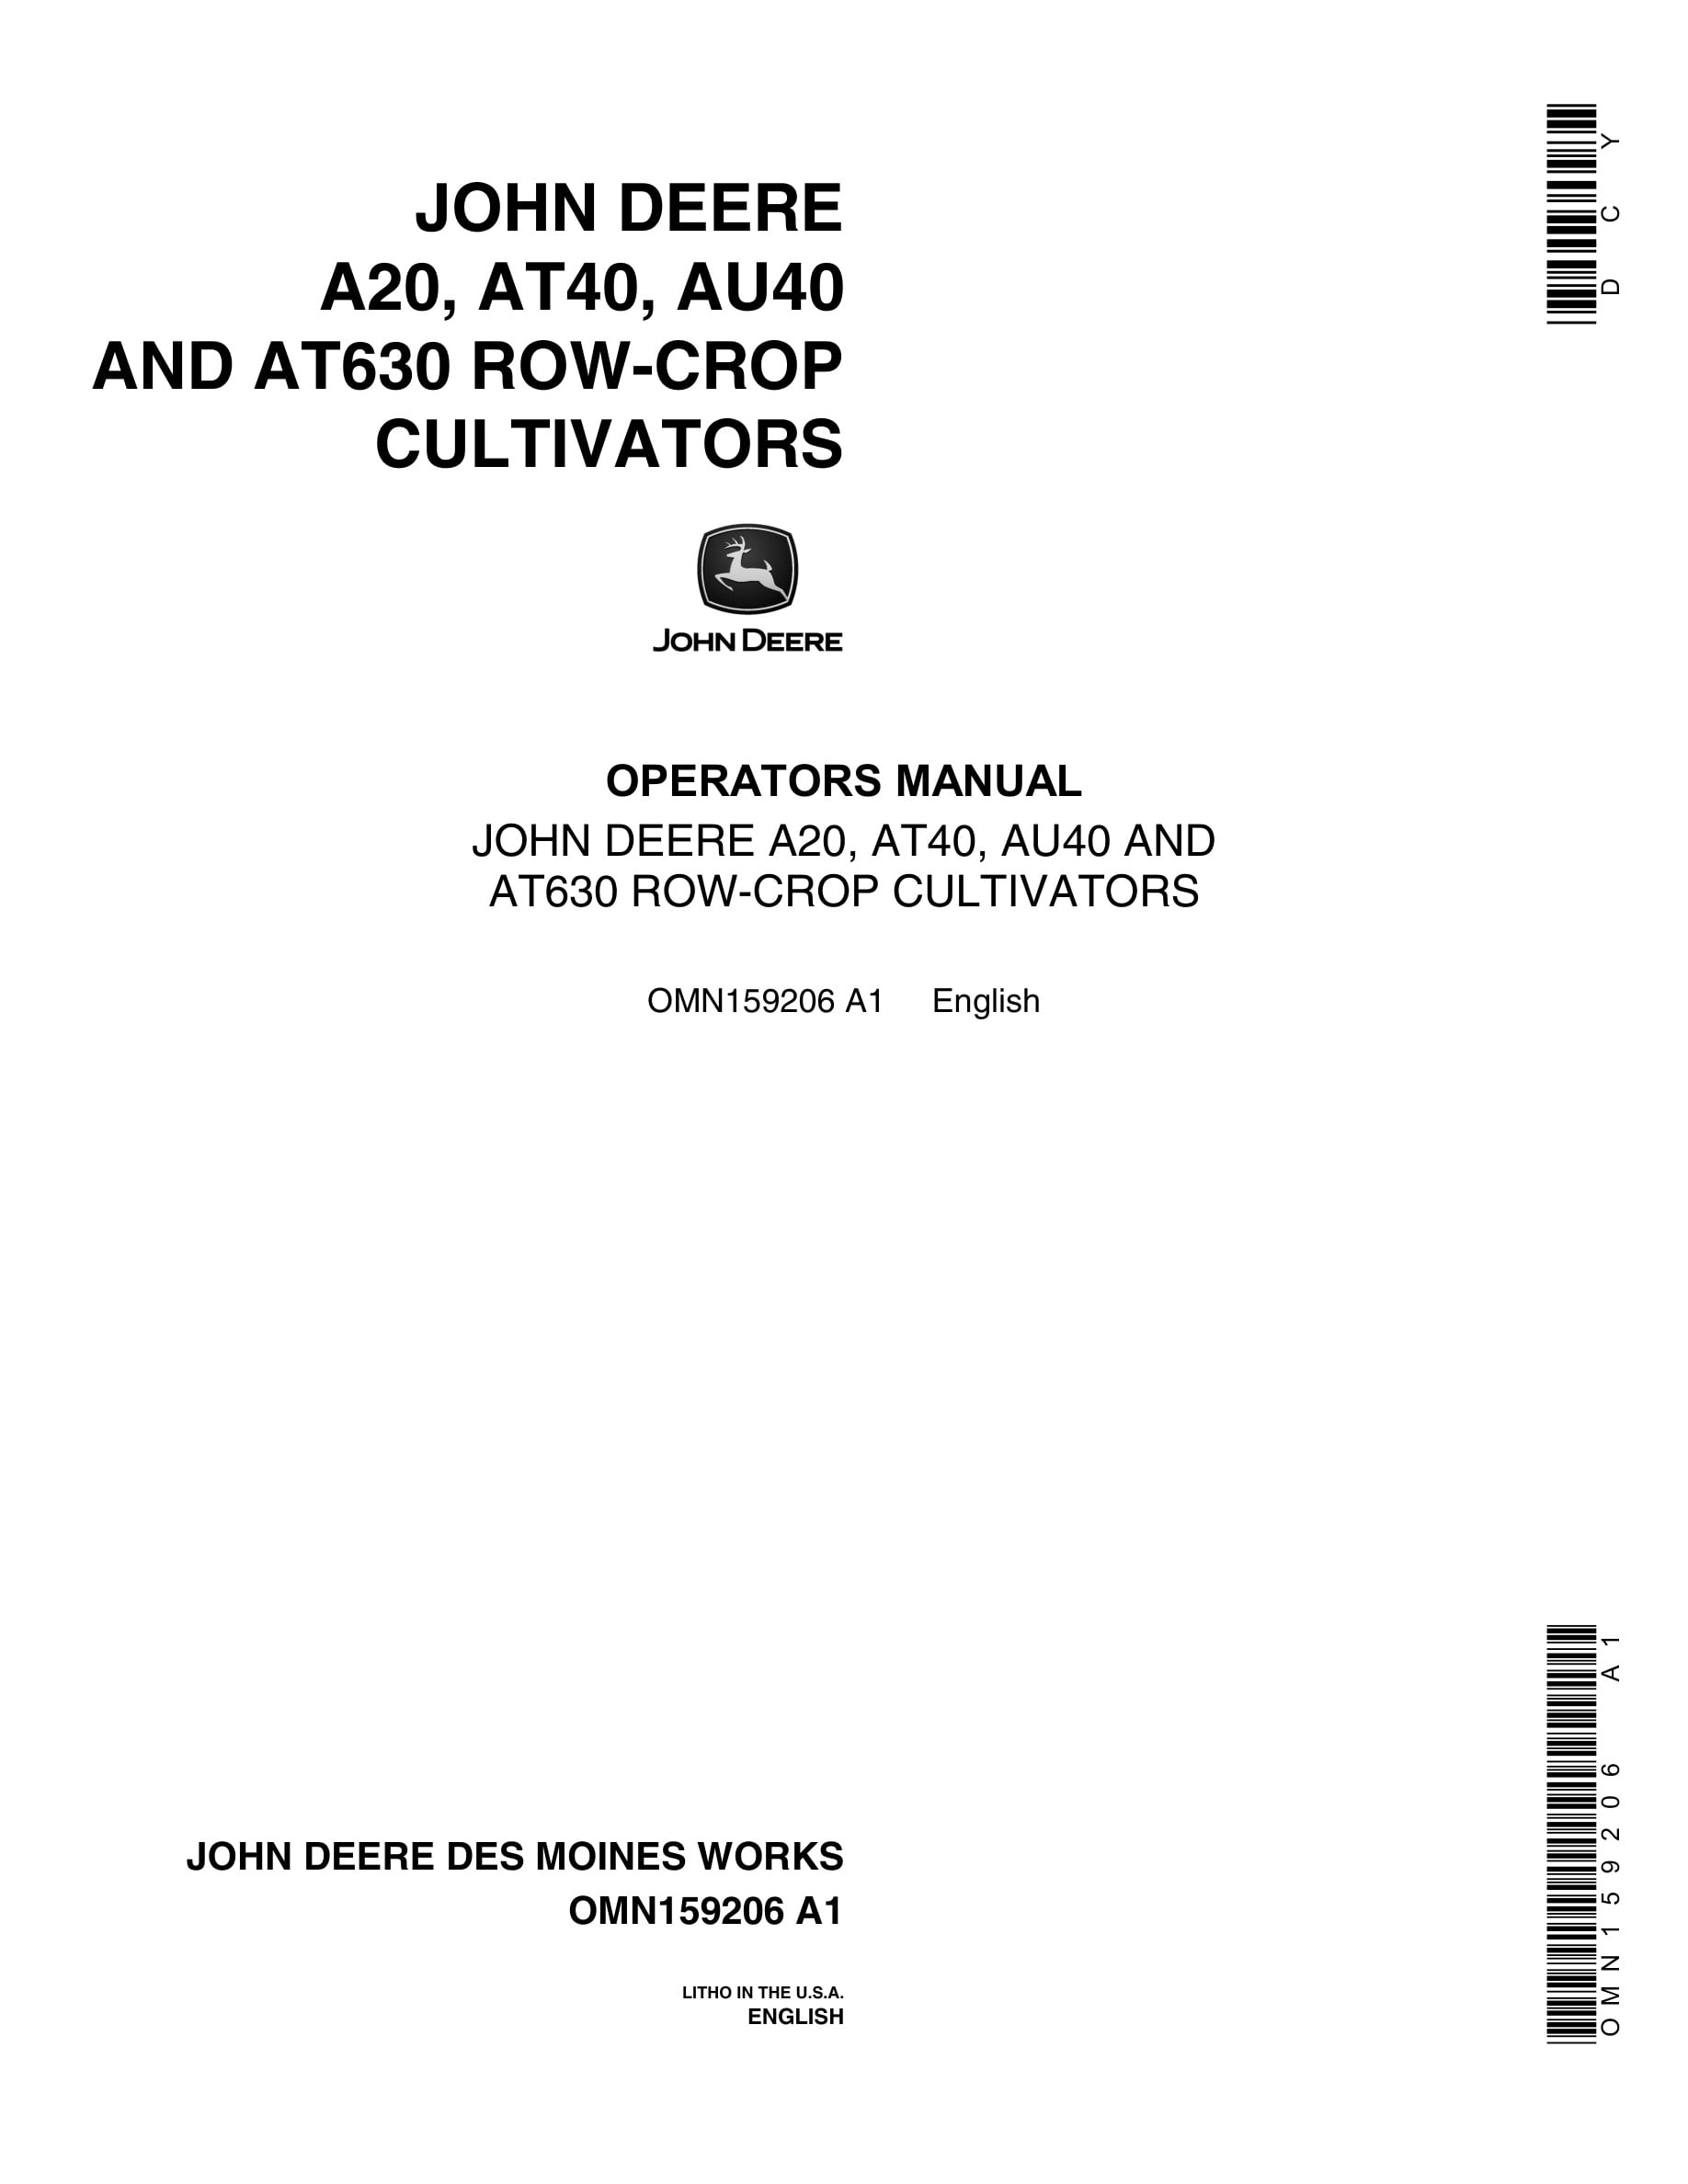 John Deere A20, AT40, AU40 AND AT630 ROW-CROP CULTIVATOR Operator Manual OMN159206-1